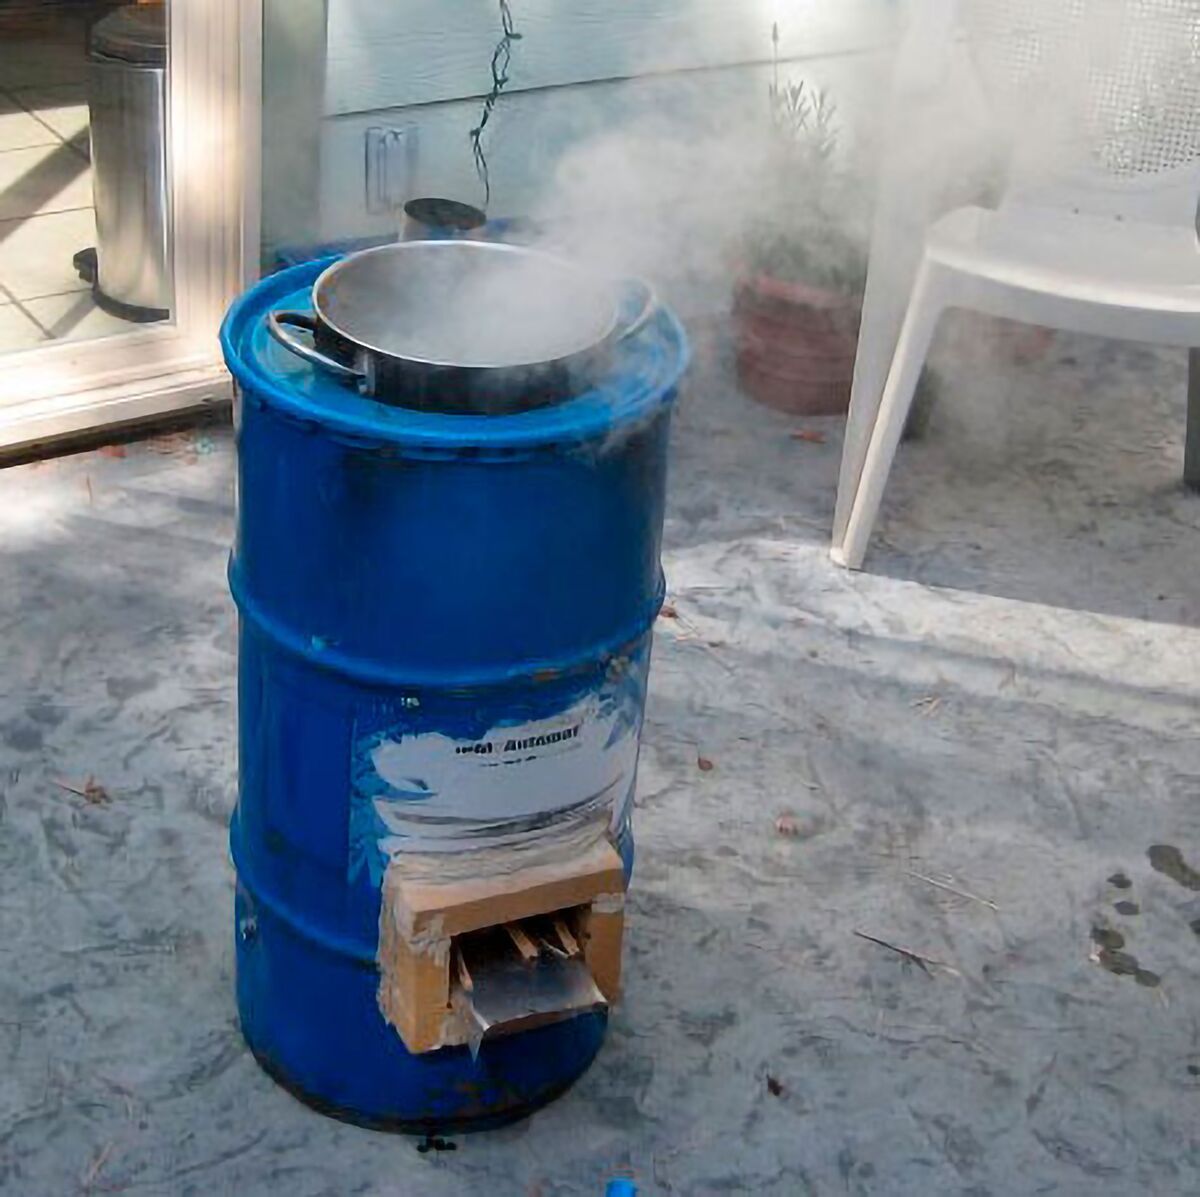 rocket-stove-appropedia-the-sustainability-wiki